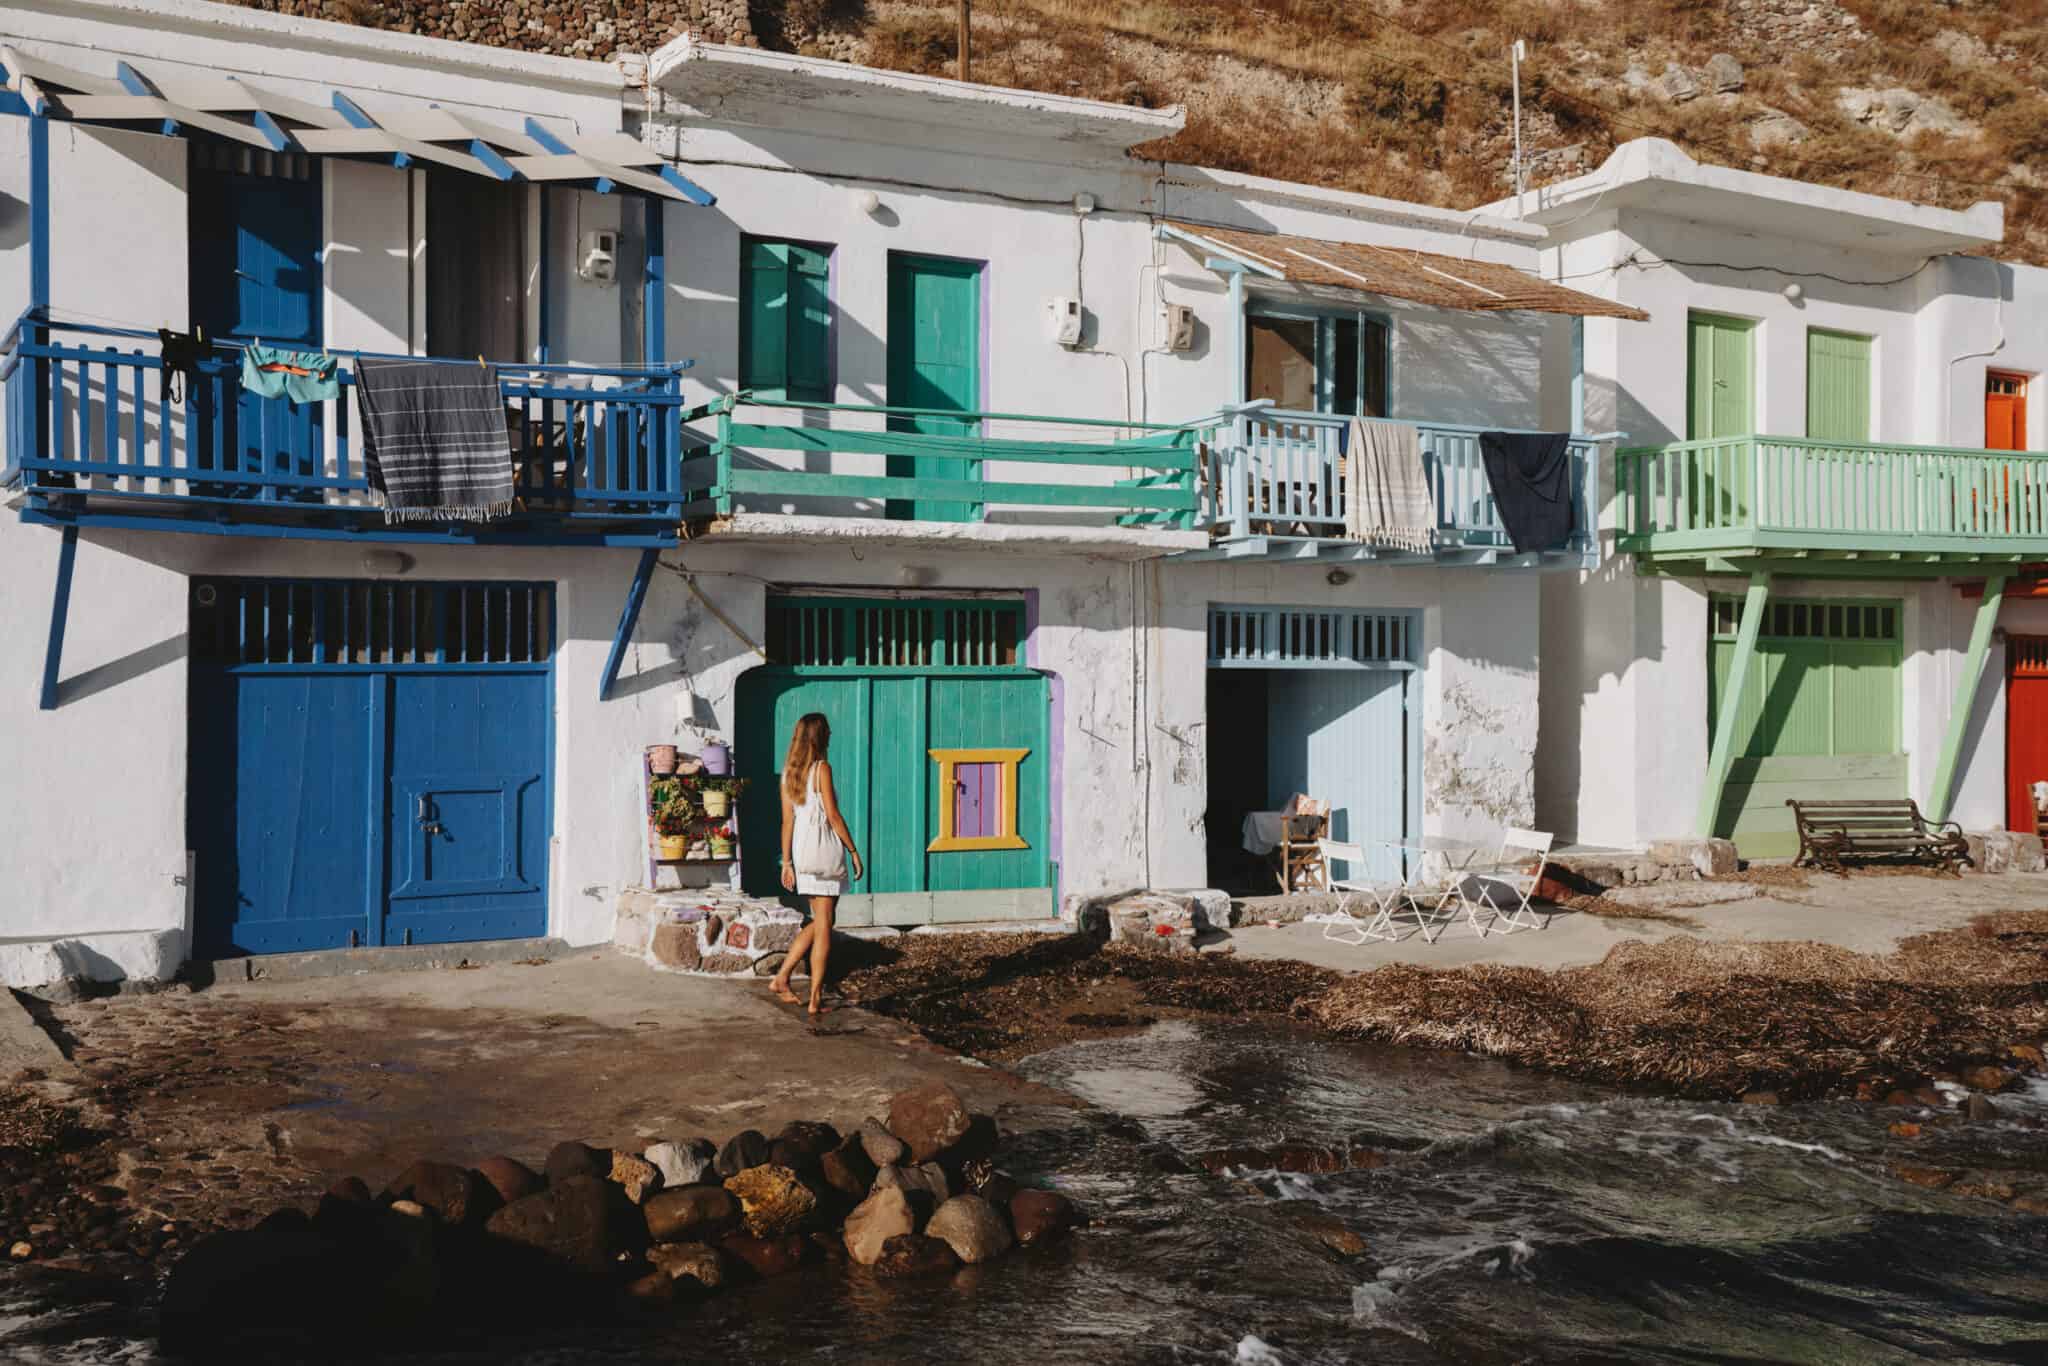 A row of colorful houses on a hillside in Milos Island.